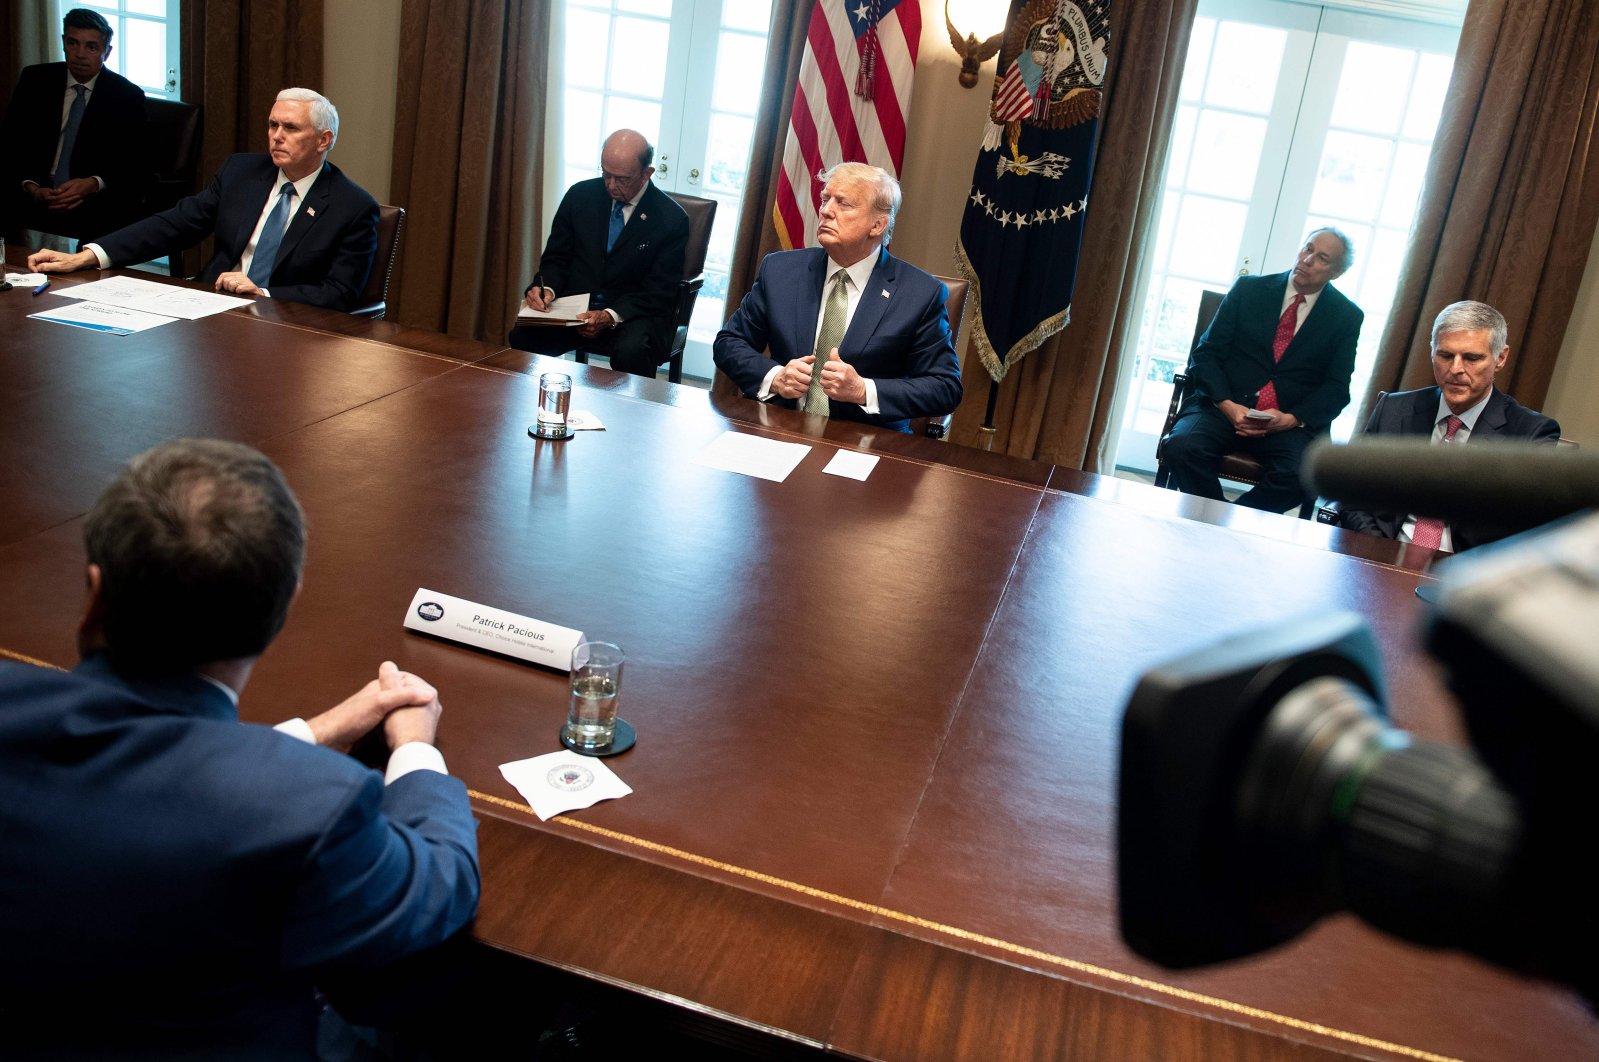 U.S. President Donald Trump and U.S. Vice President Mike Pence listen during a meeting with hotel and tourism executives in the Cabinet Room of the White House about the effect of the novel coronavirus epidemic, Tuesday, March 17, 2020. (AFP Photo)